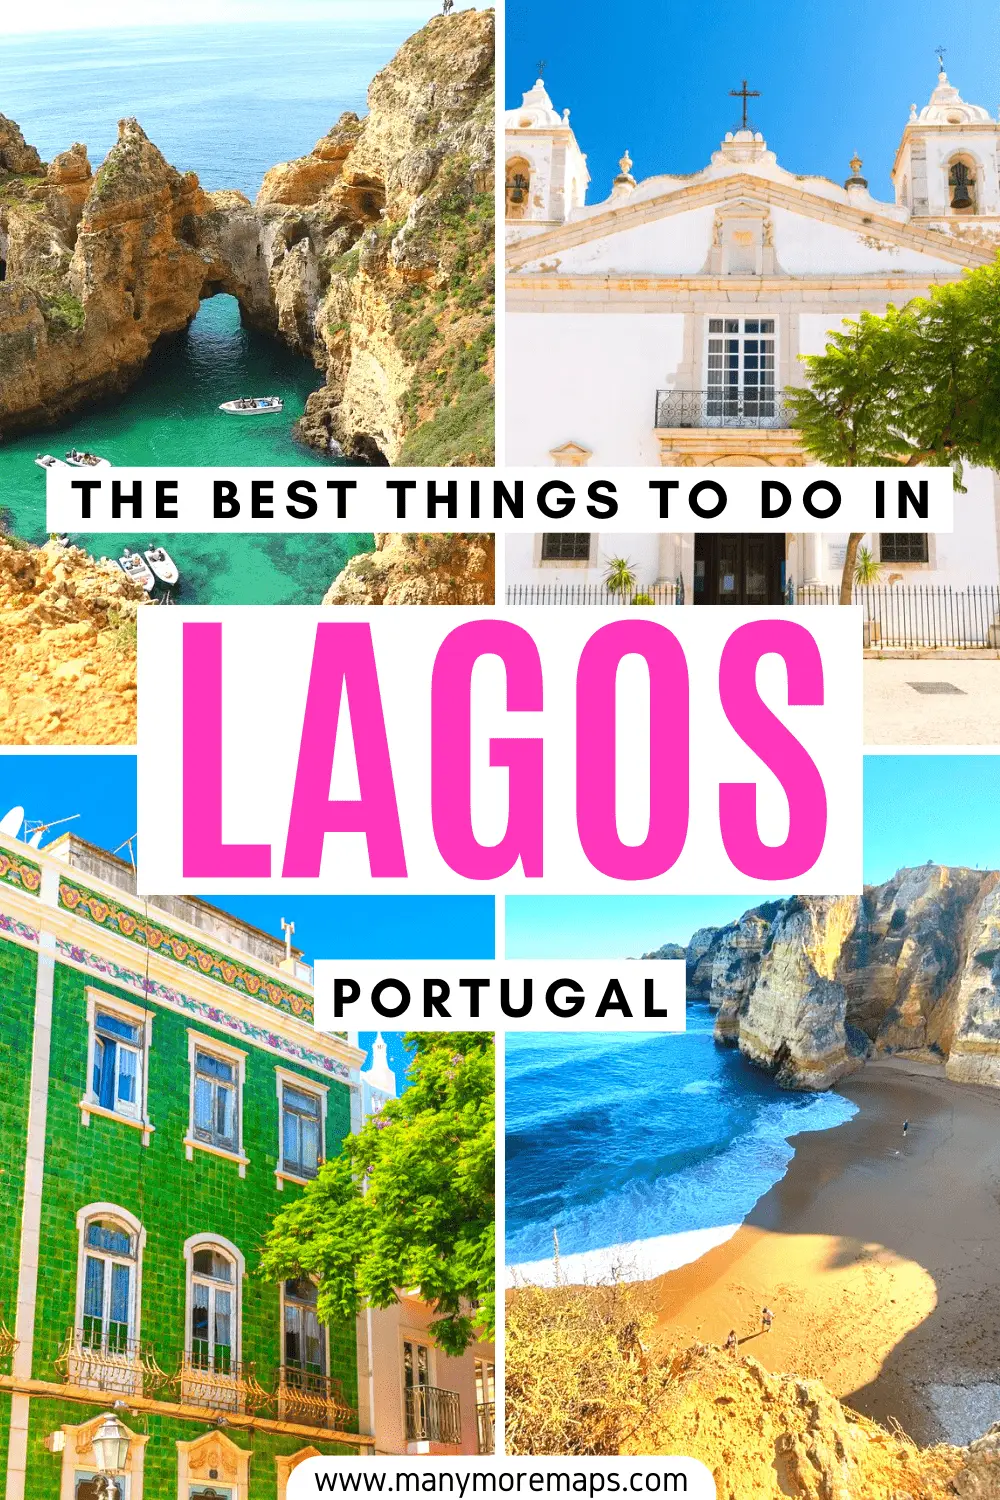 Plannig a trip to the Algarve town of Lagos in Portugal? Here are all of the very best things to do and places to visit on a trip to Lagos, including the Ponta da Piedade, that you'll need to add to your Portugal or Algarve itinerary!